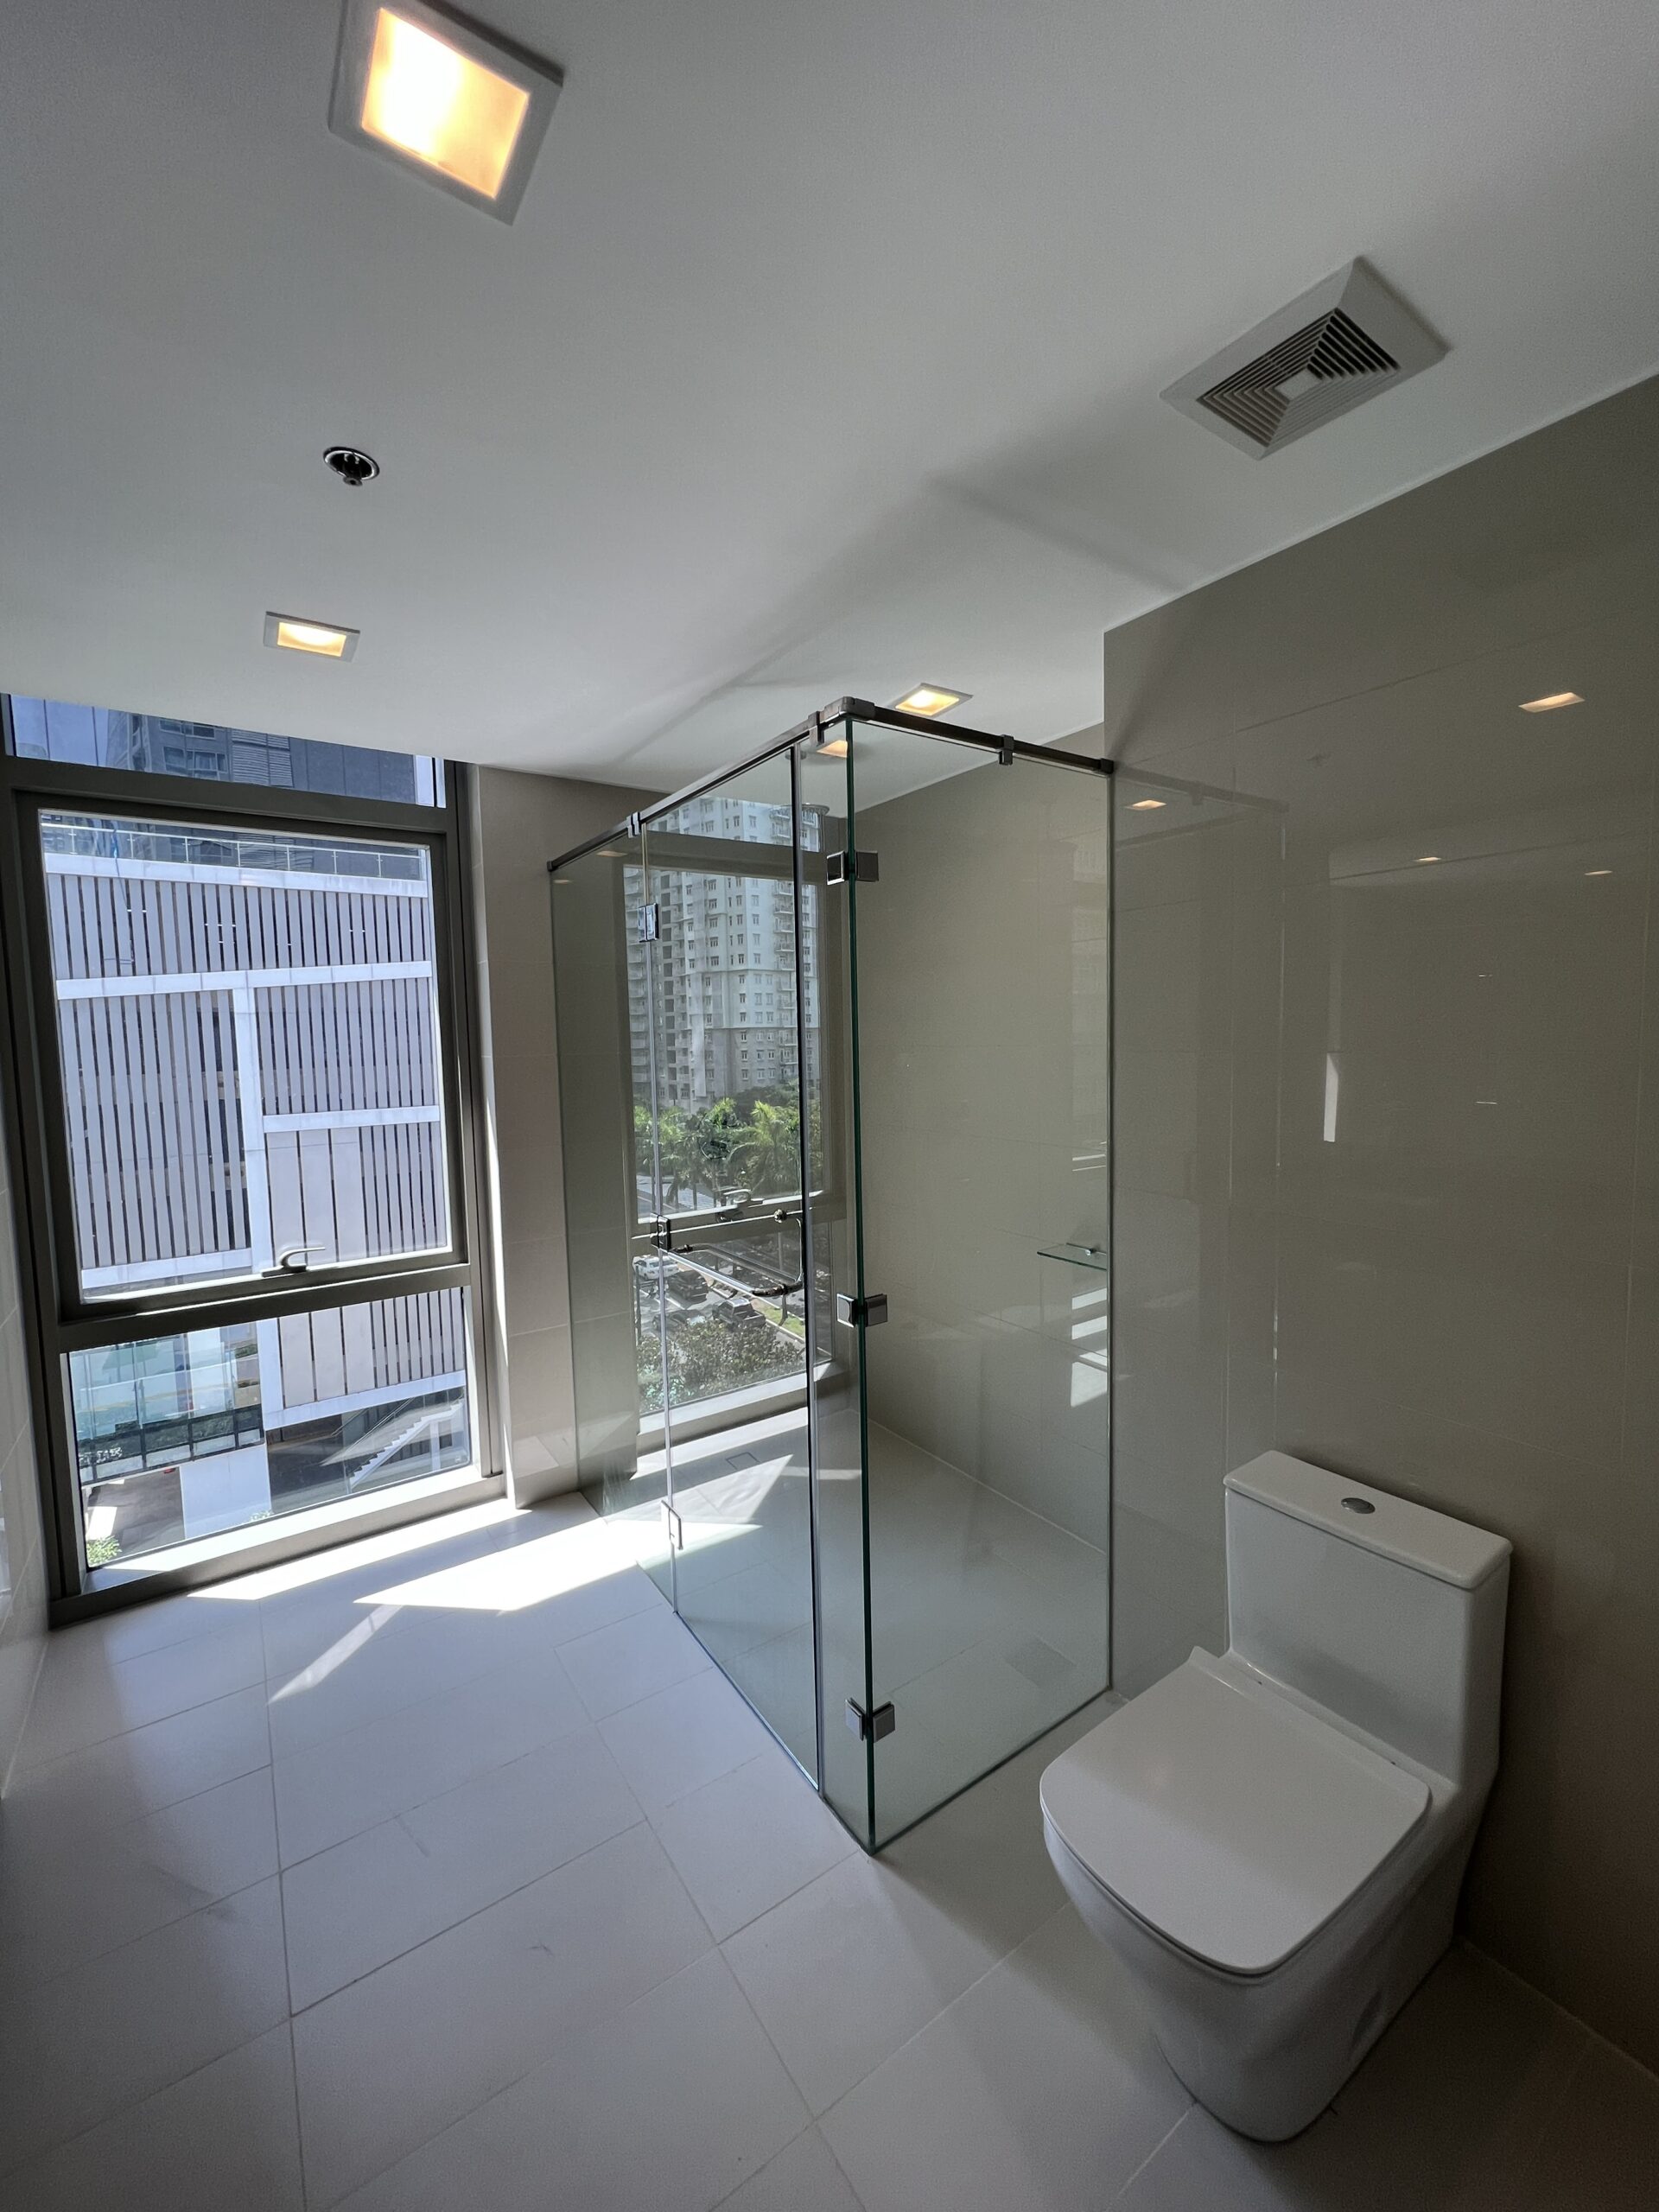 East Gallery Place 4BR For Sale at Bonifacio Global City BGC